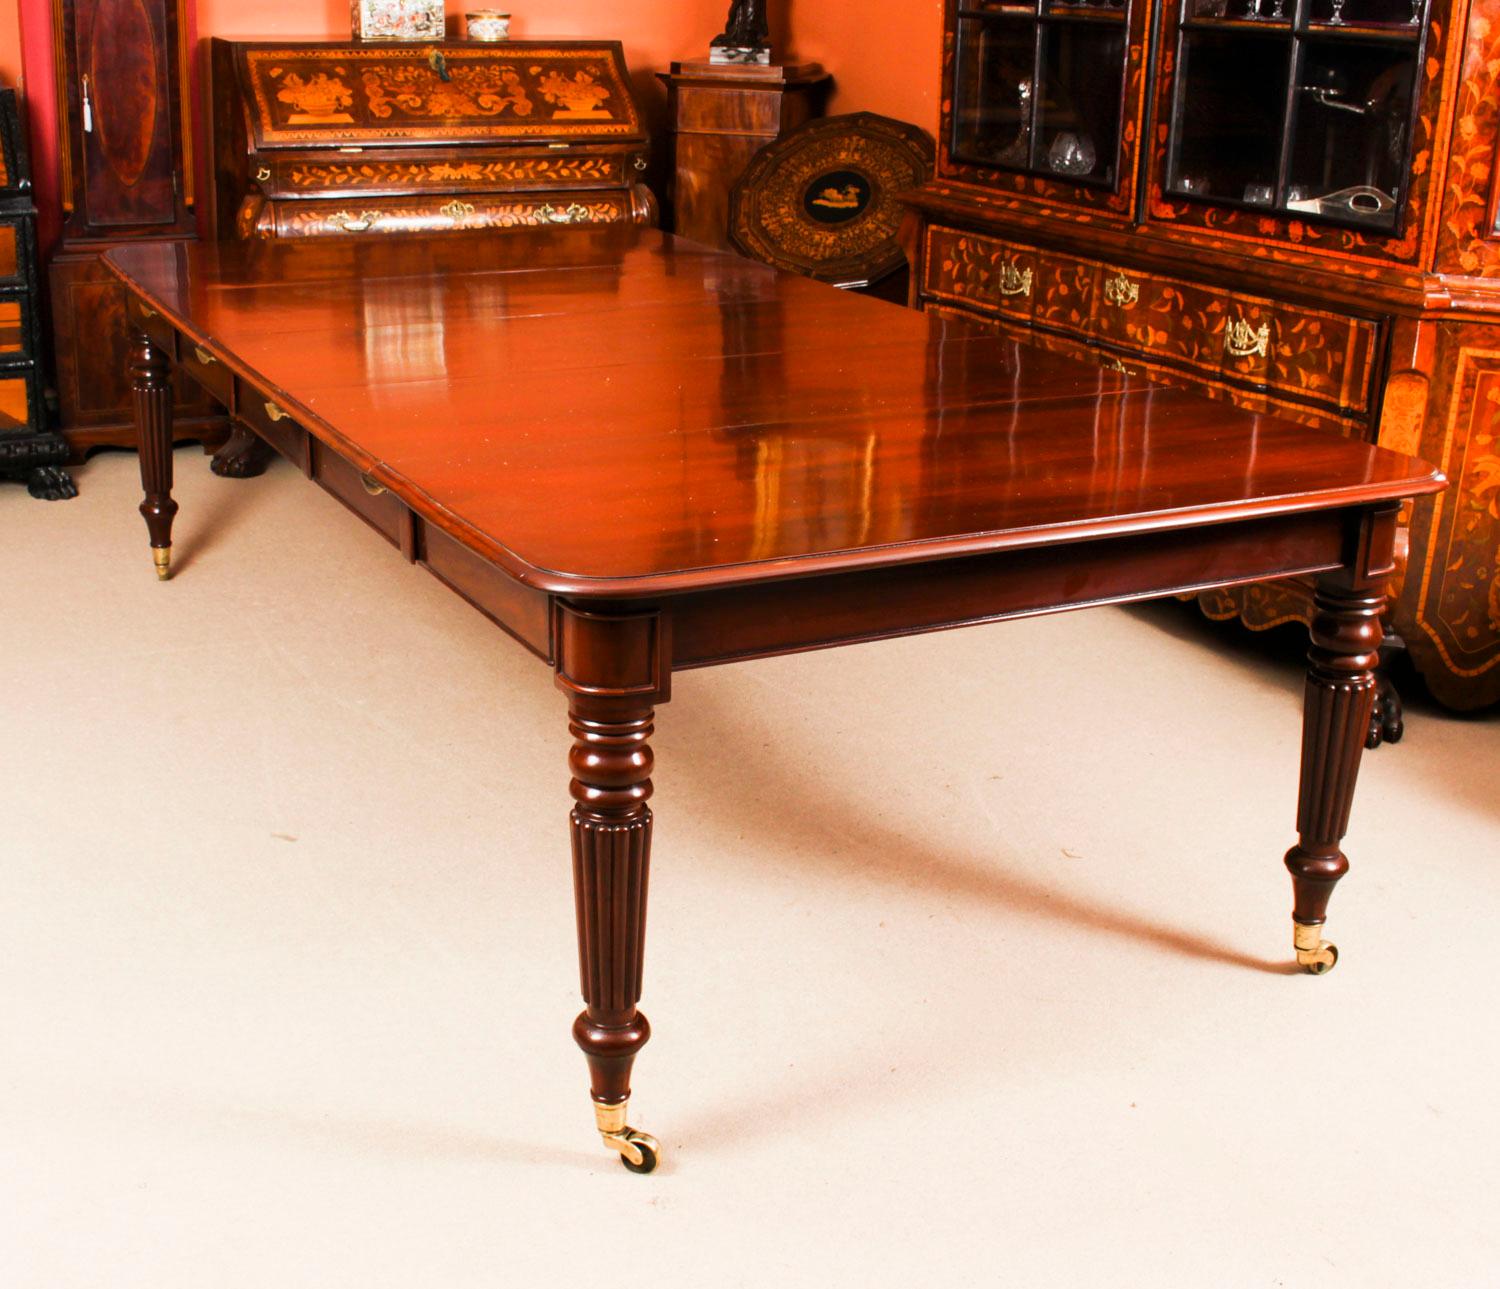 Early 19th Century Antique Regency Flame Mahogany Dining Table & 10 Regency Chairs 19th C